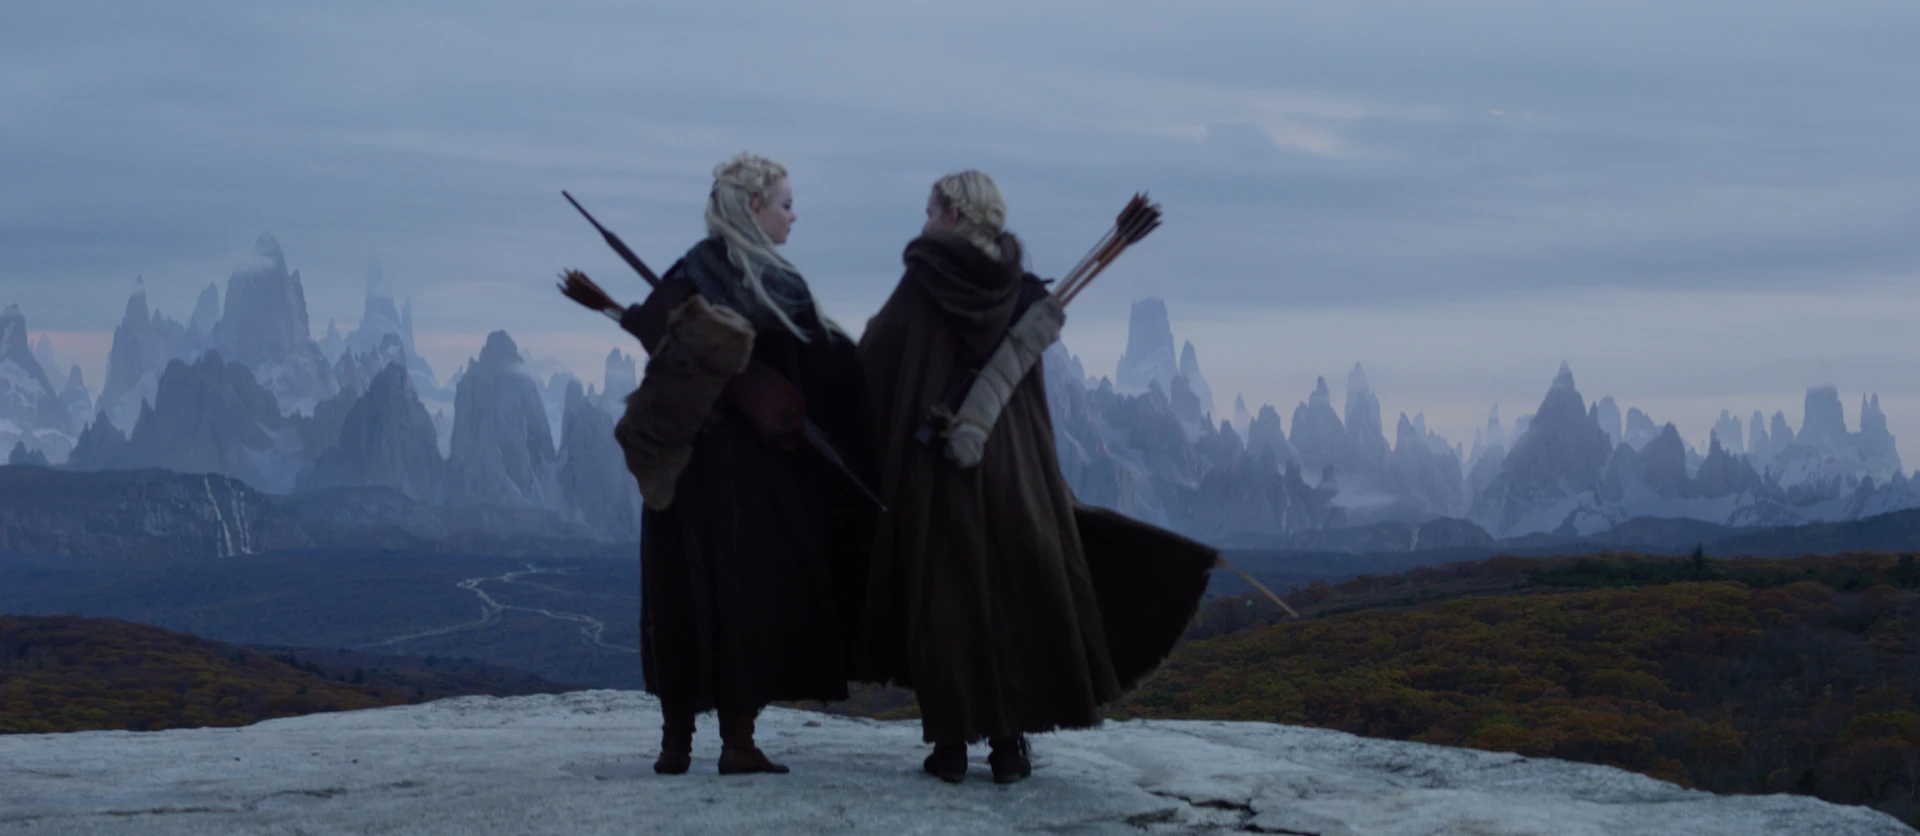 Maniac women with bows and mountains in the background Raynault vfx